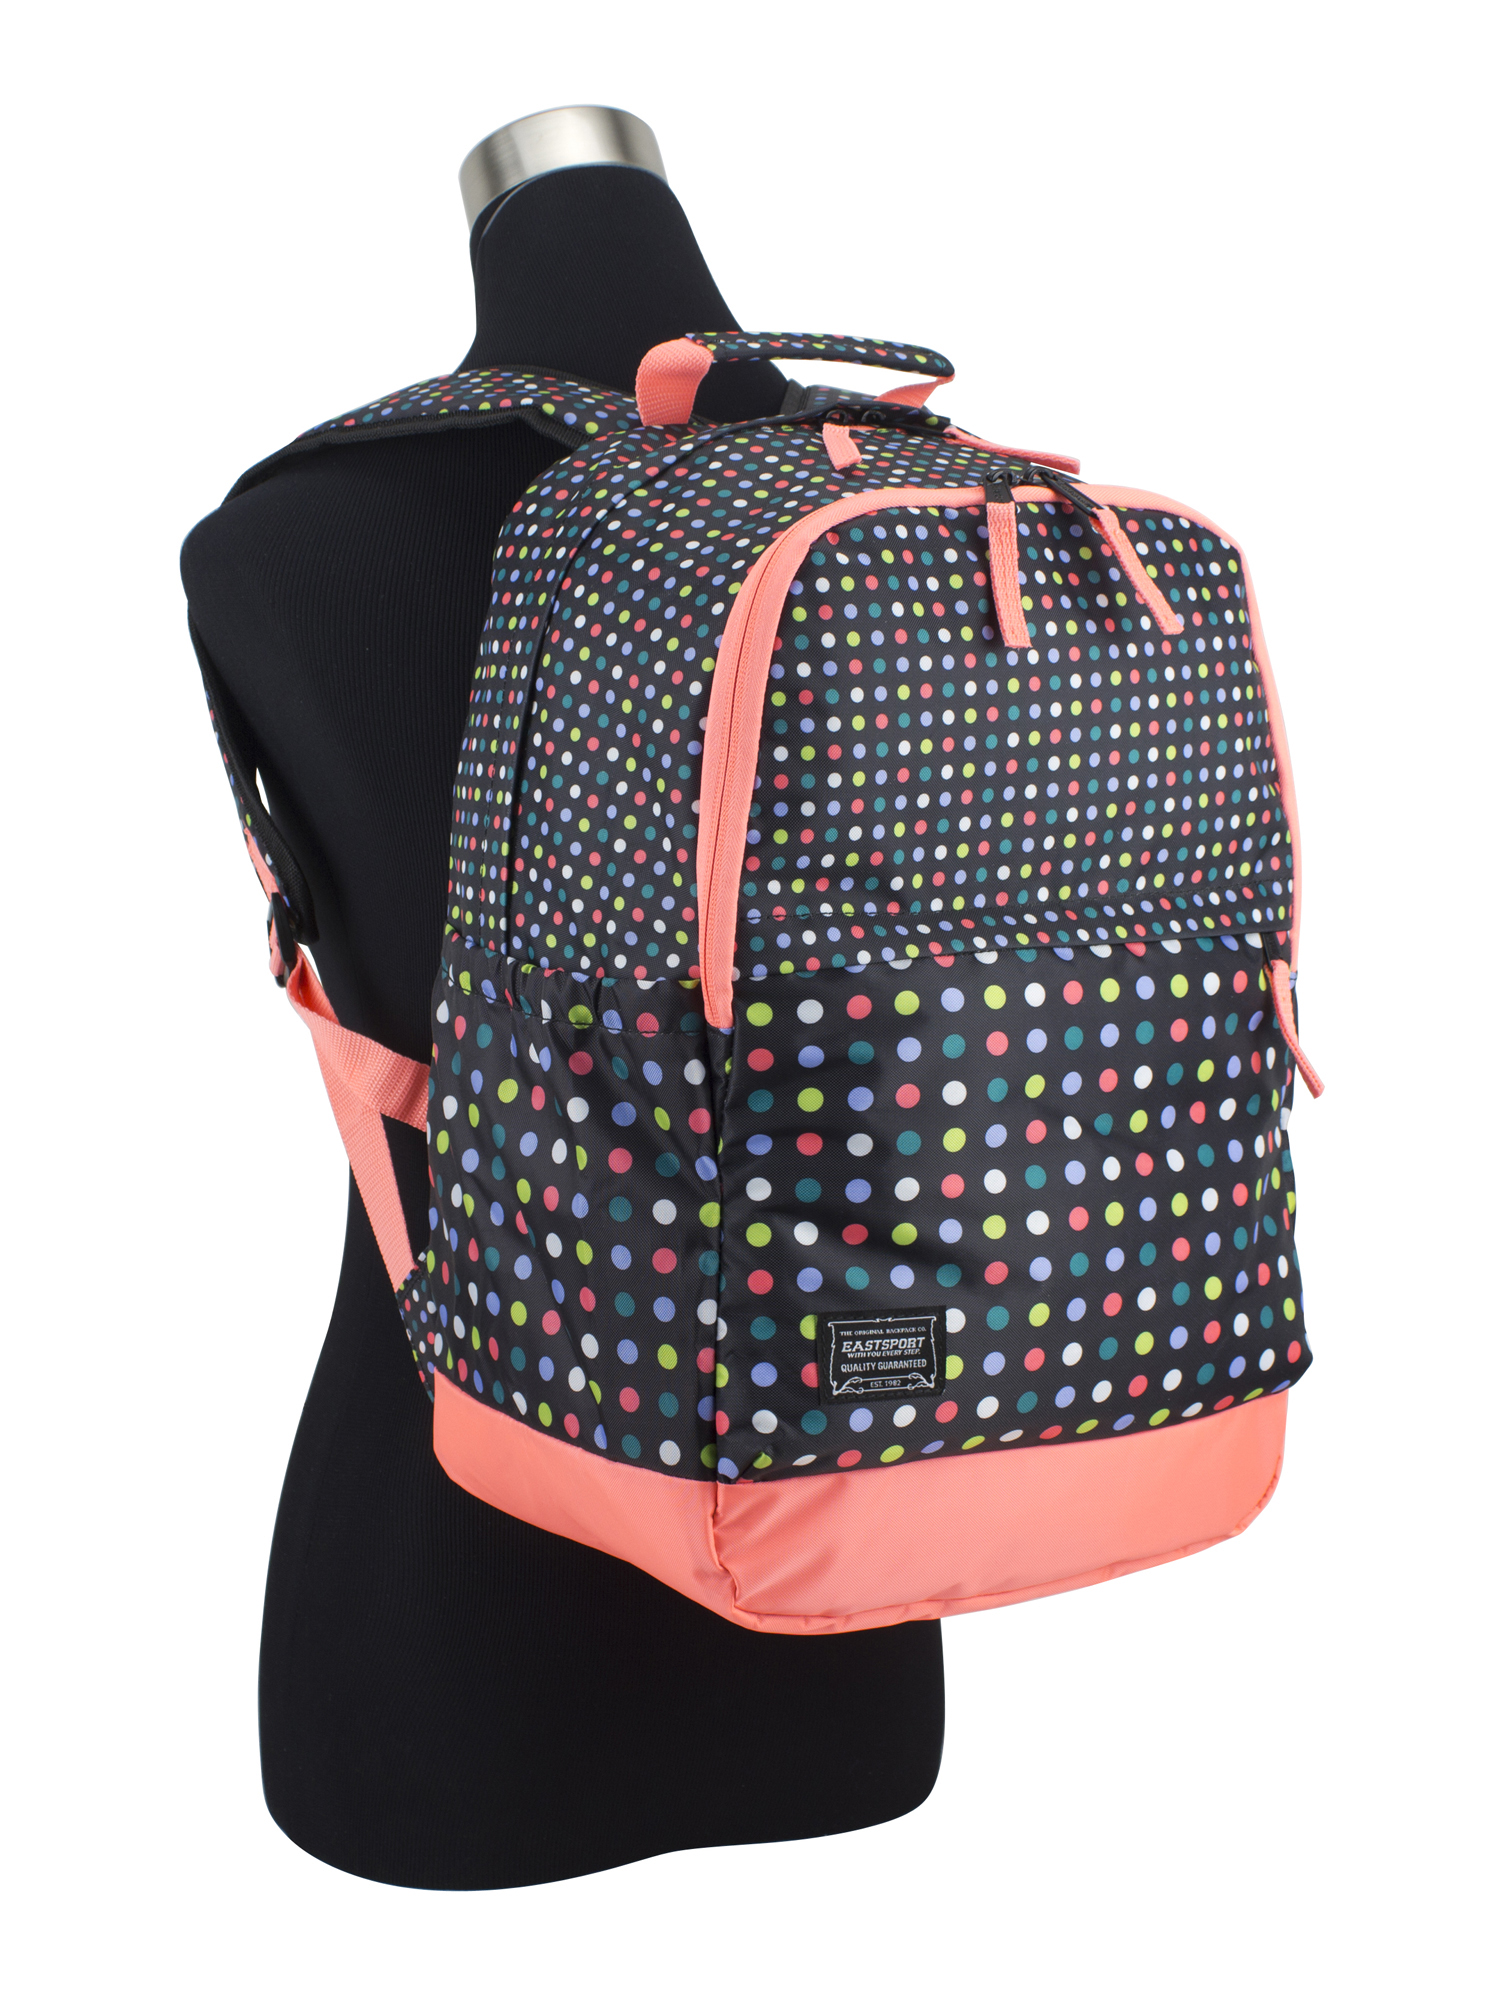 Emma Girl's Student Backpack with Computer Pocket - image 3 of 6